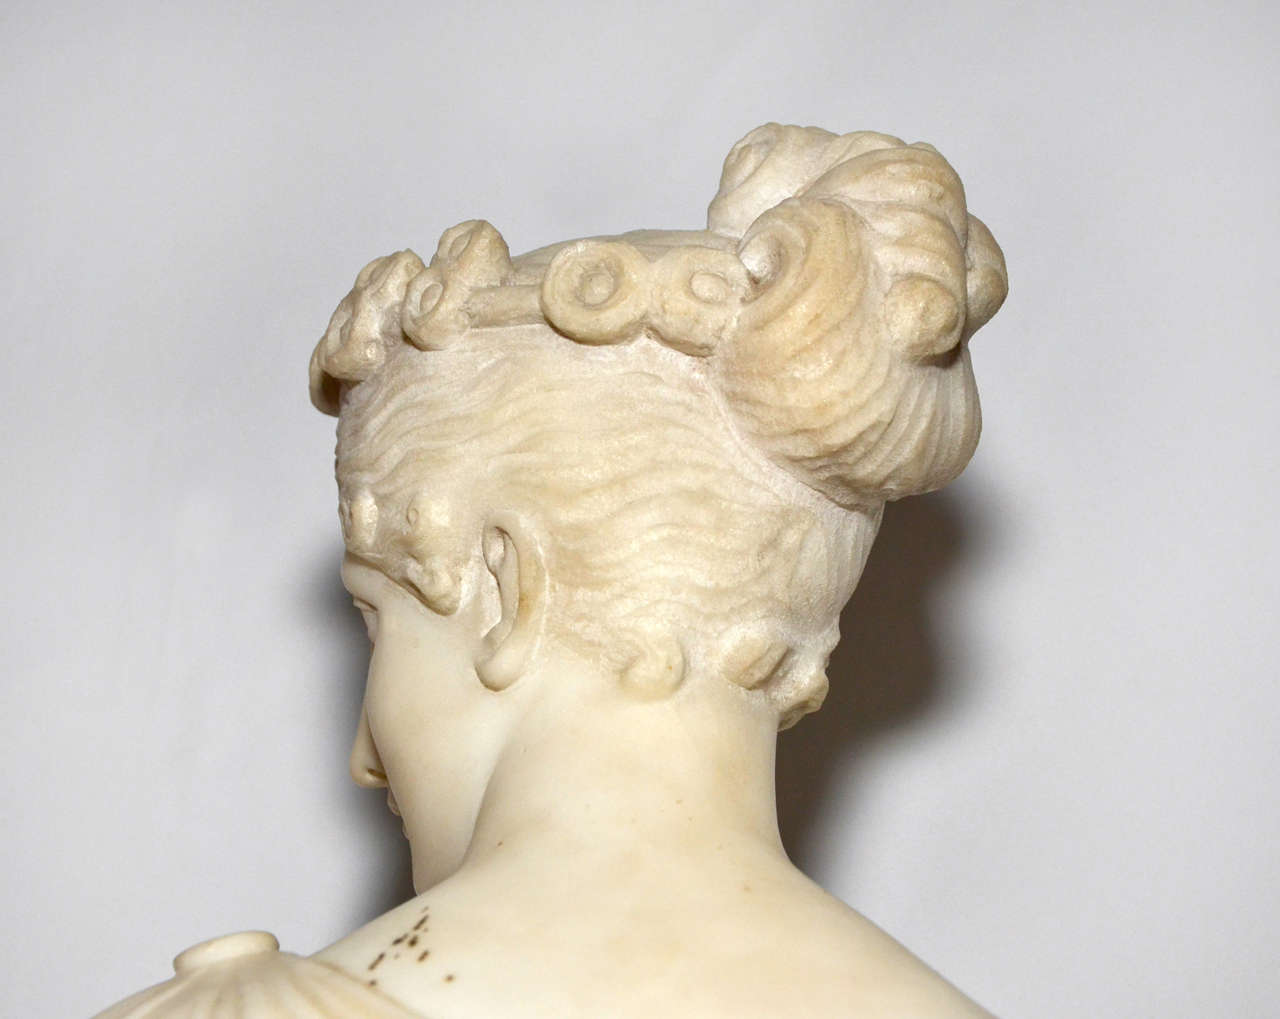 1820s Carrara Marble Statue of a Draped Woman For Sale 1